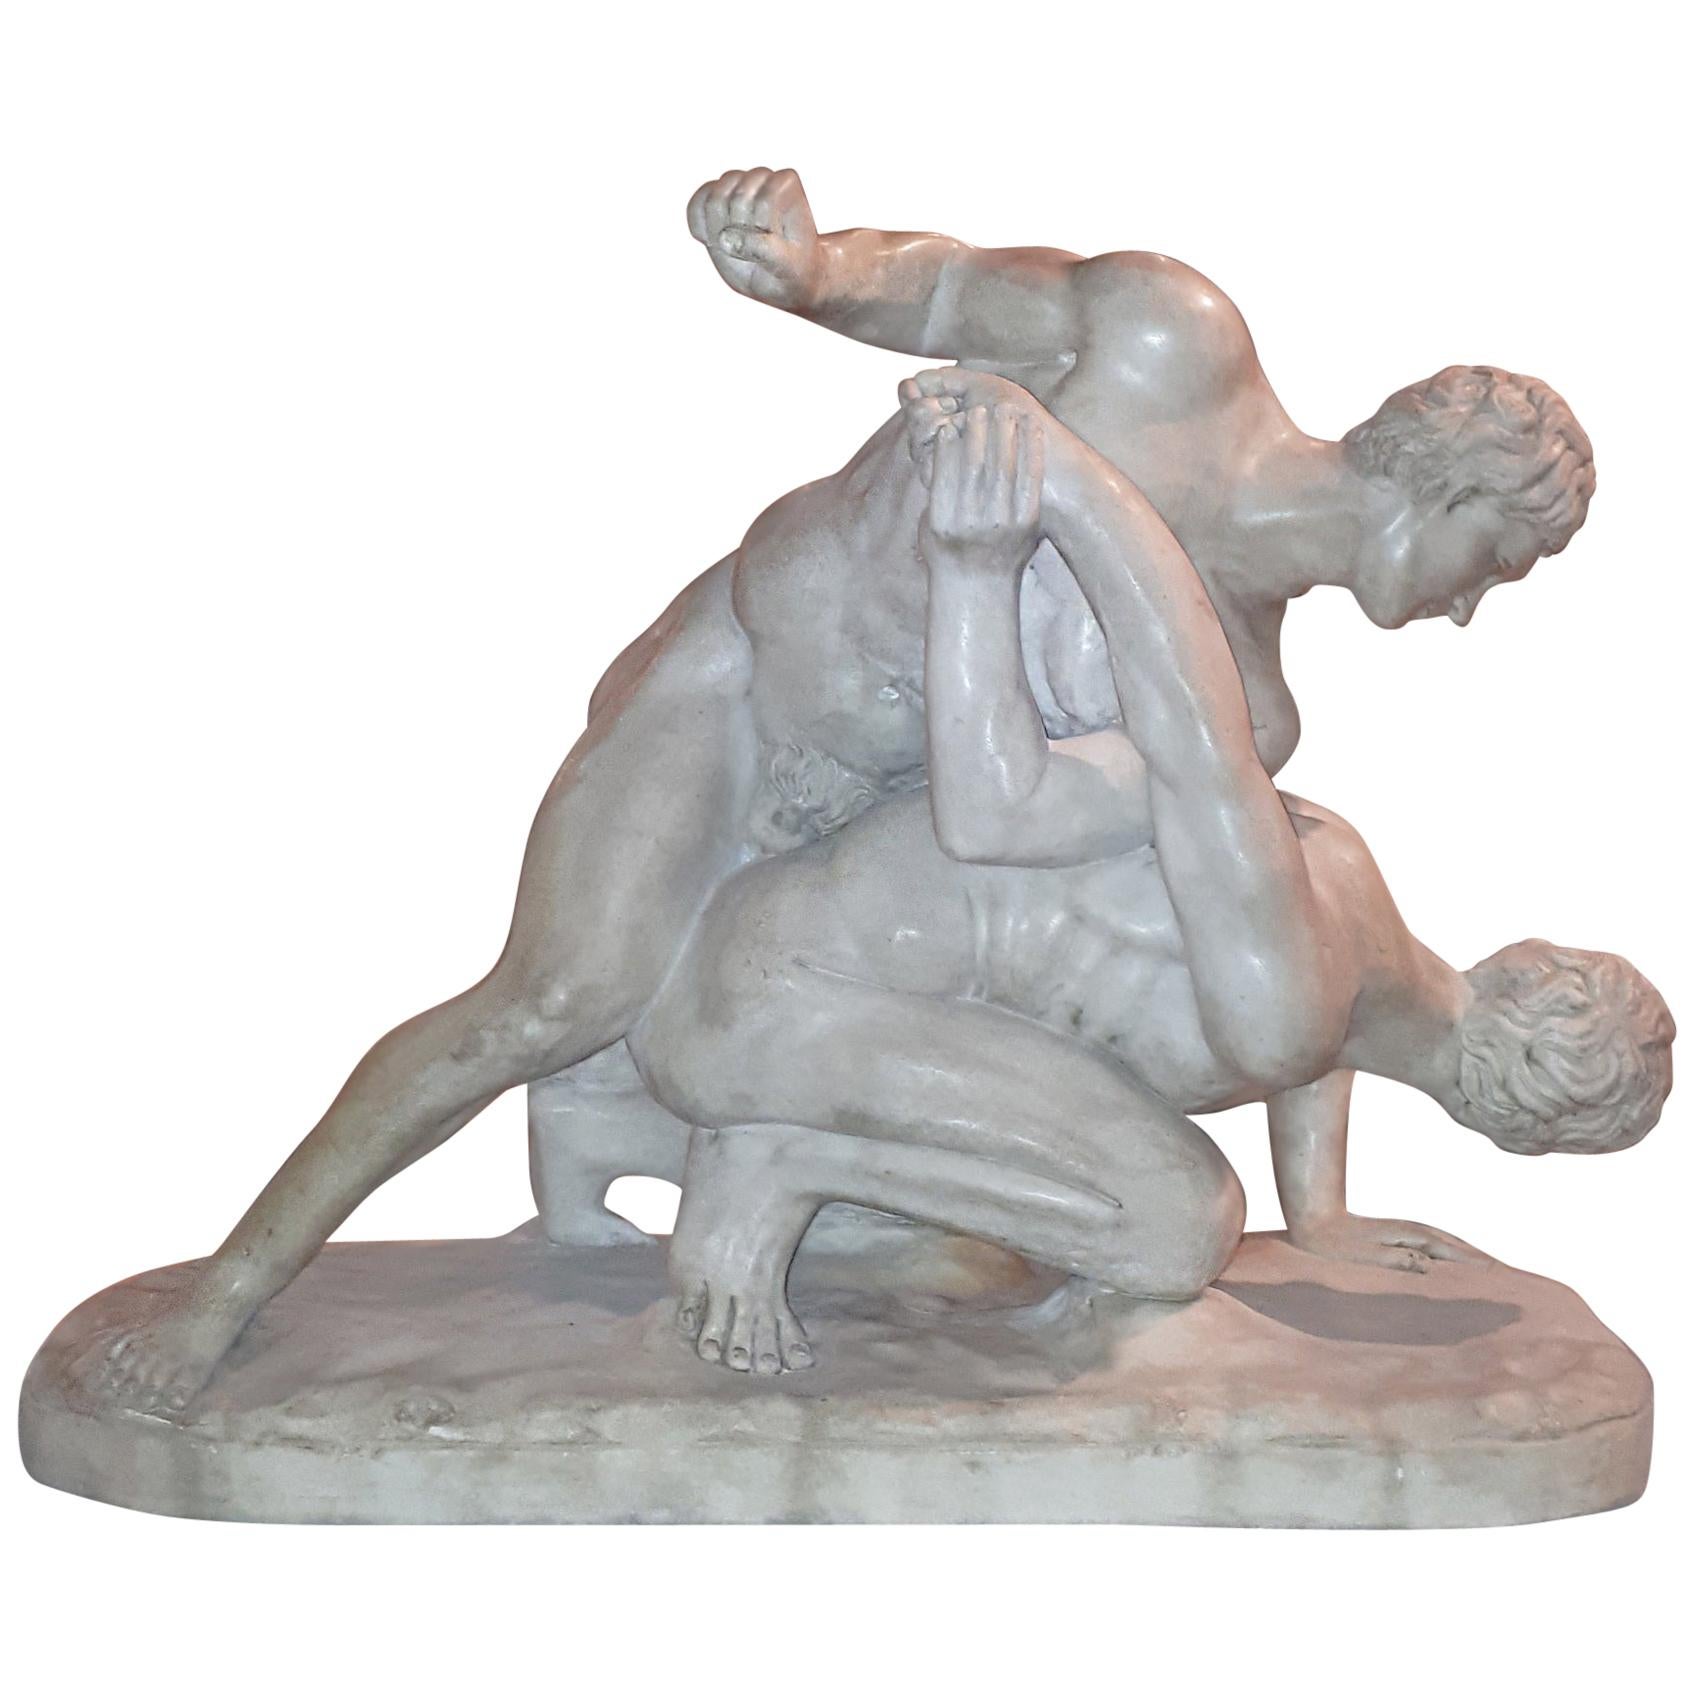 19th Century Grand Tour Marble Sculpture after the Antique Uffizi Wrestlers